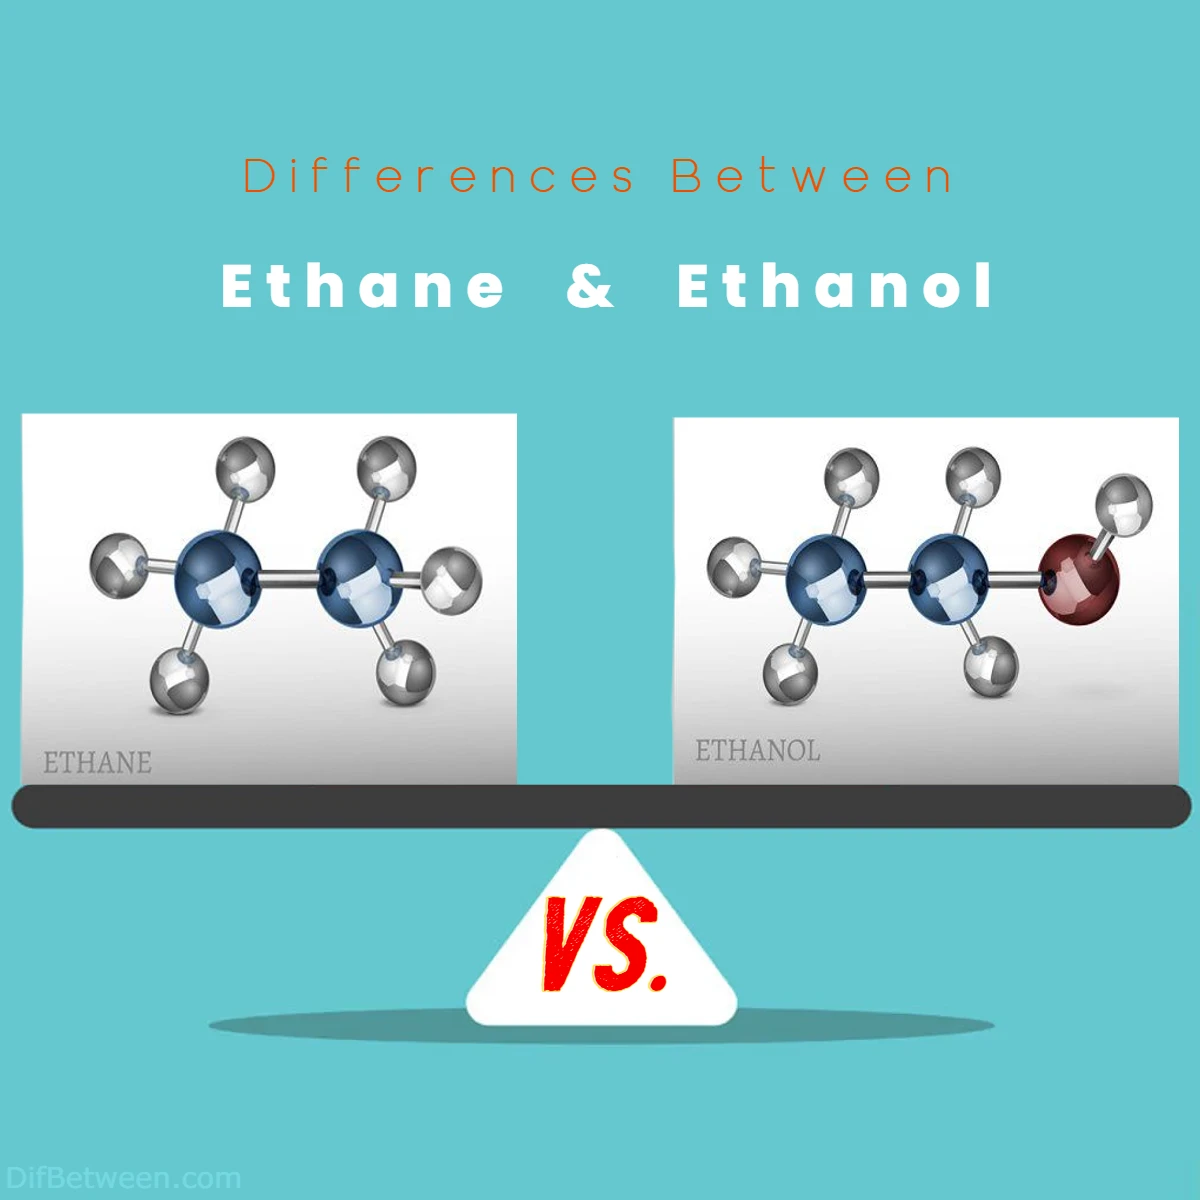 Differences Between Ethane vs Ethanol